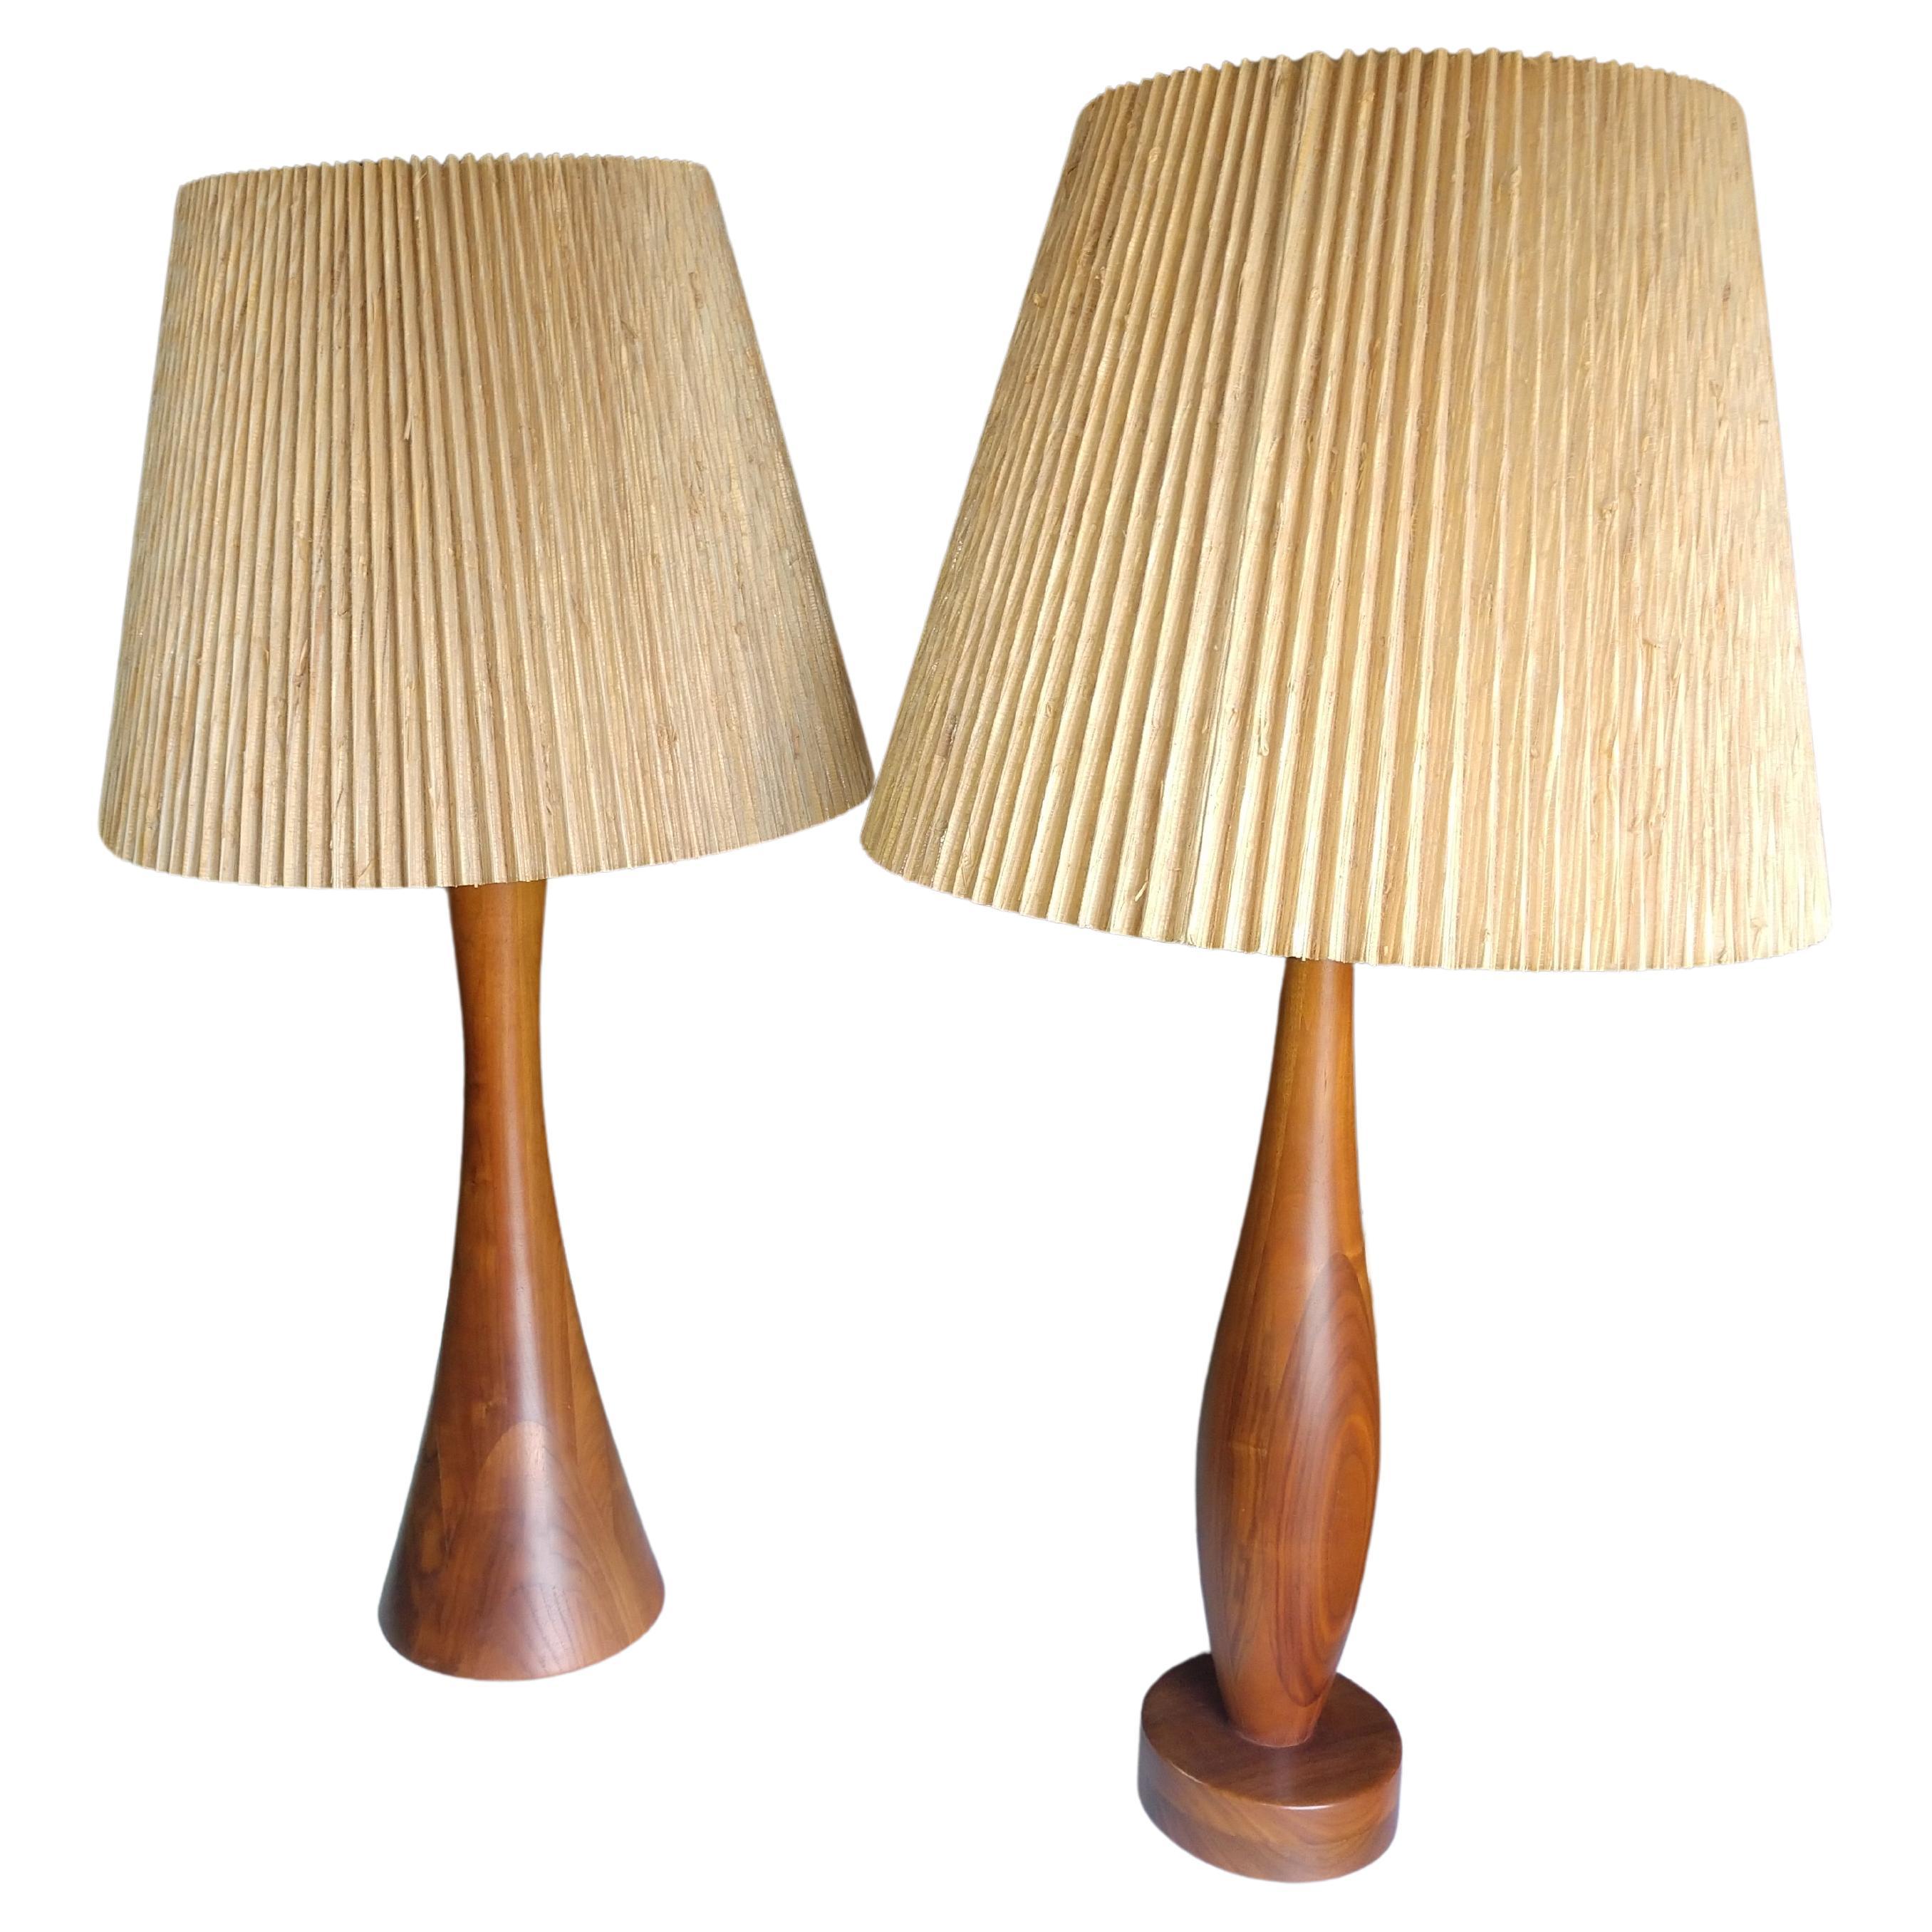 Fantastic pair of complimentary sculptural walnut table lamps designed by Philip Lloyd Powell in New Hope Pennsylvania. Shades seem to be original, hgt with shades is 37 with a 19 inch diameter at bottom of shade. Height to top of socket is 27 inch.